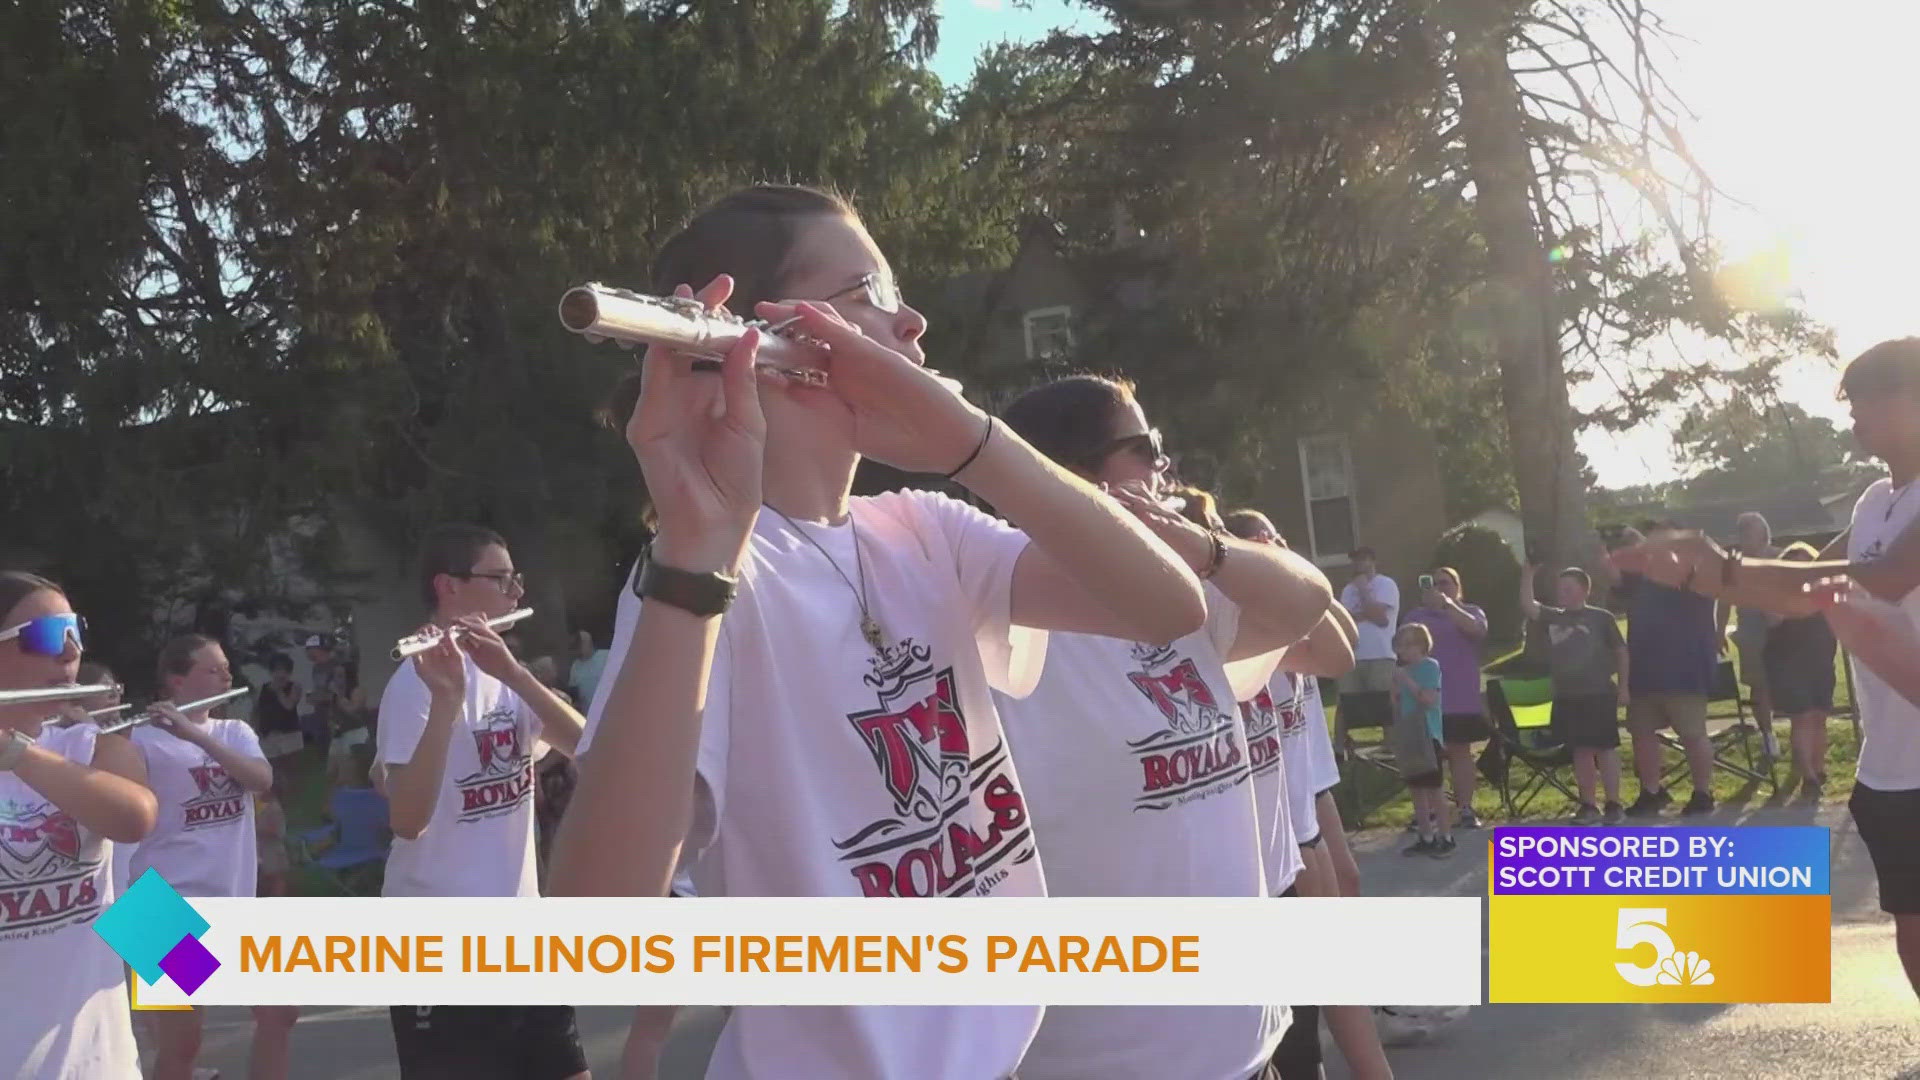 The Marine Illinois Firemen’s Parade brought the heat, in the middle of America in the middle of June, and they flame to please!